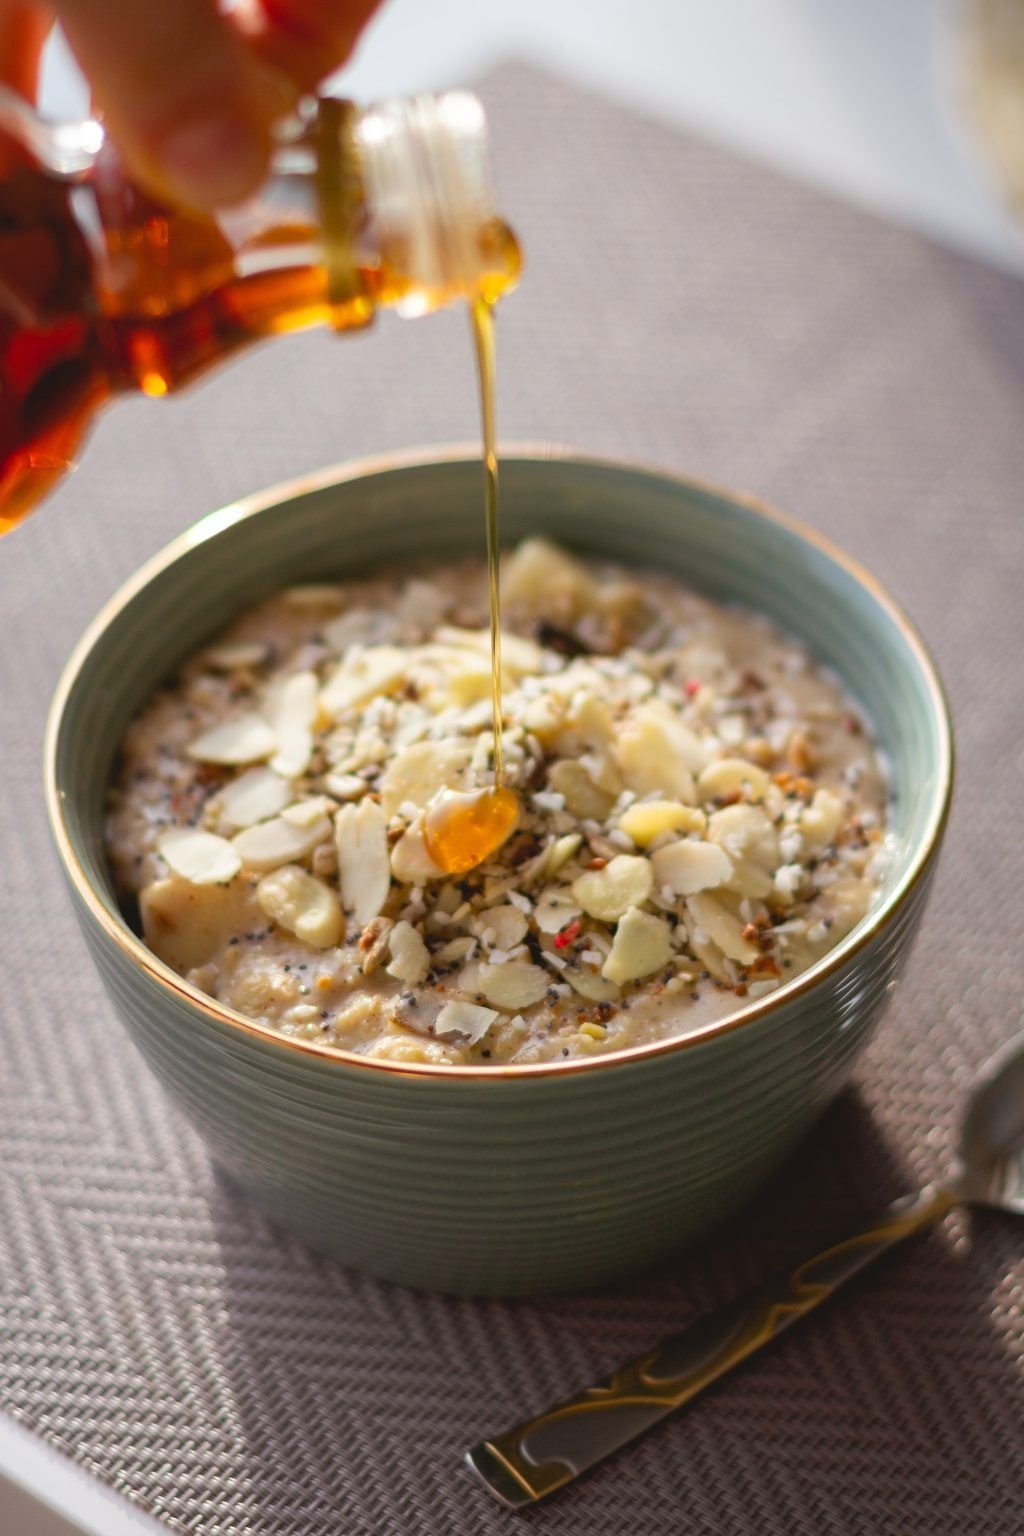 9 types of quality oats for healthy breakfasts that you should try